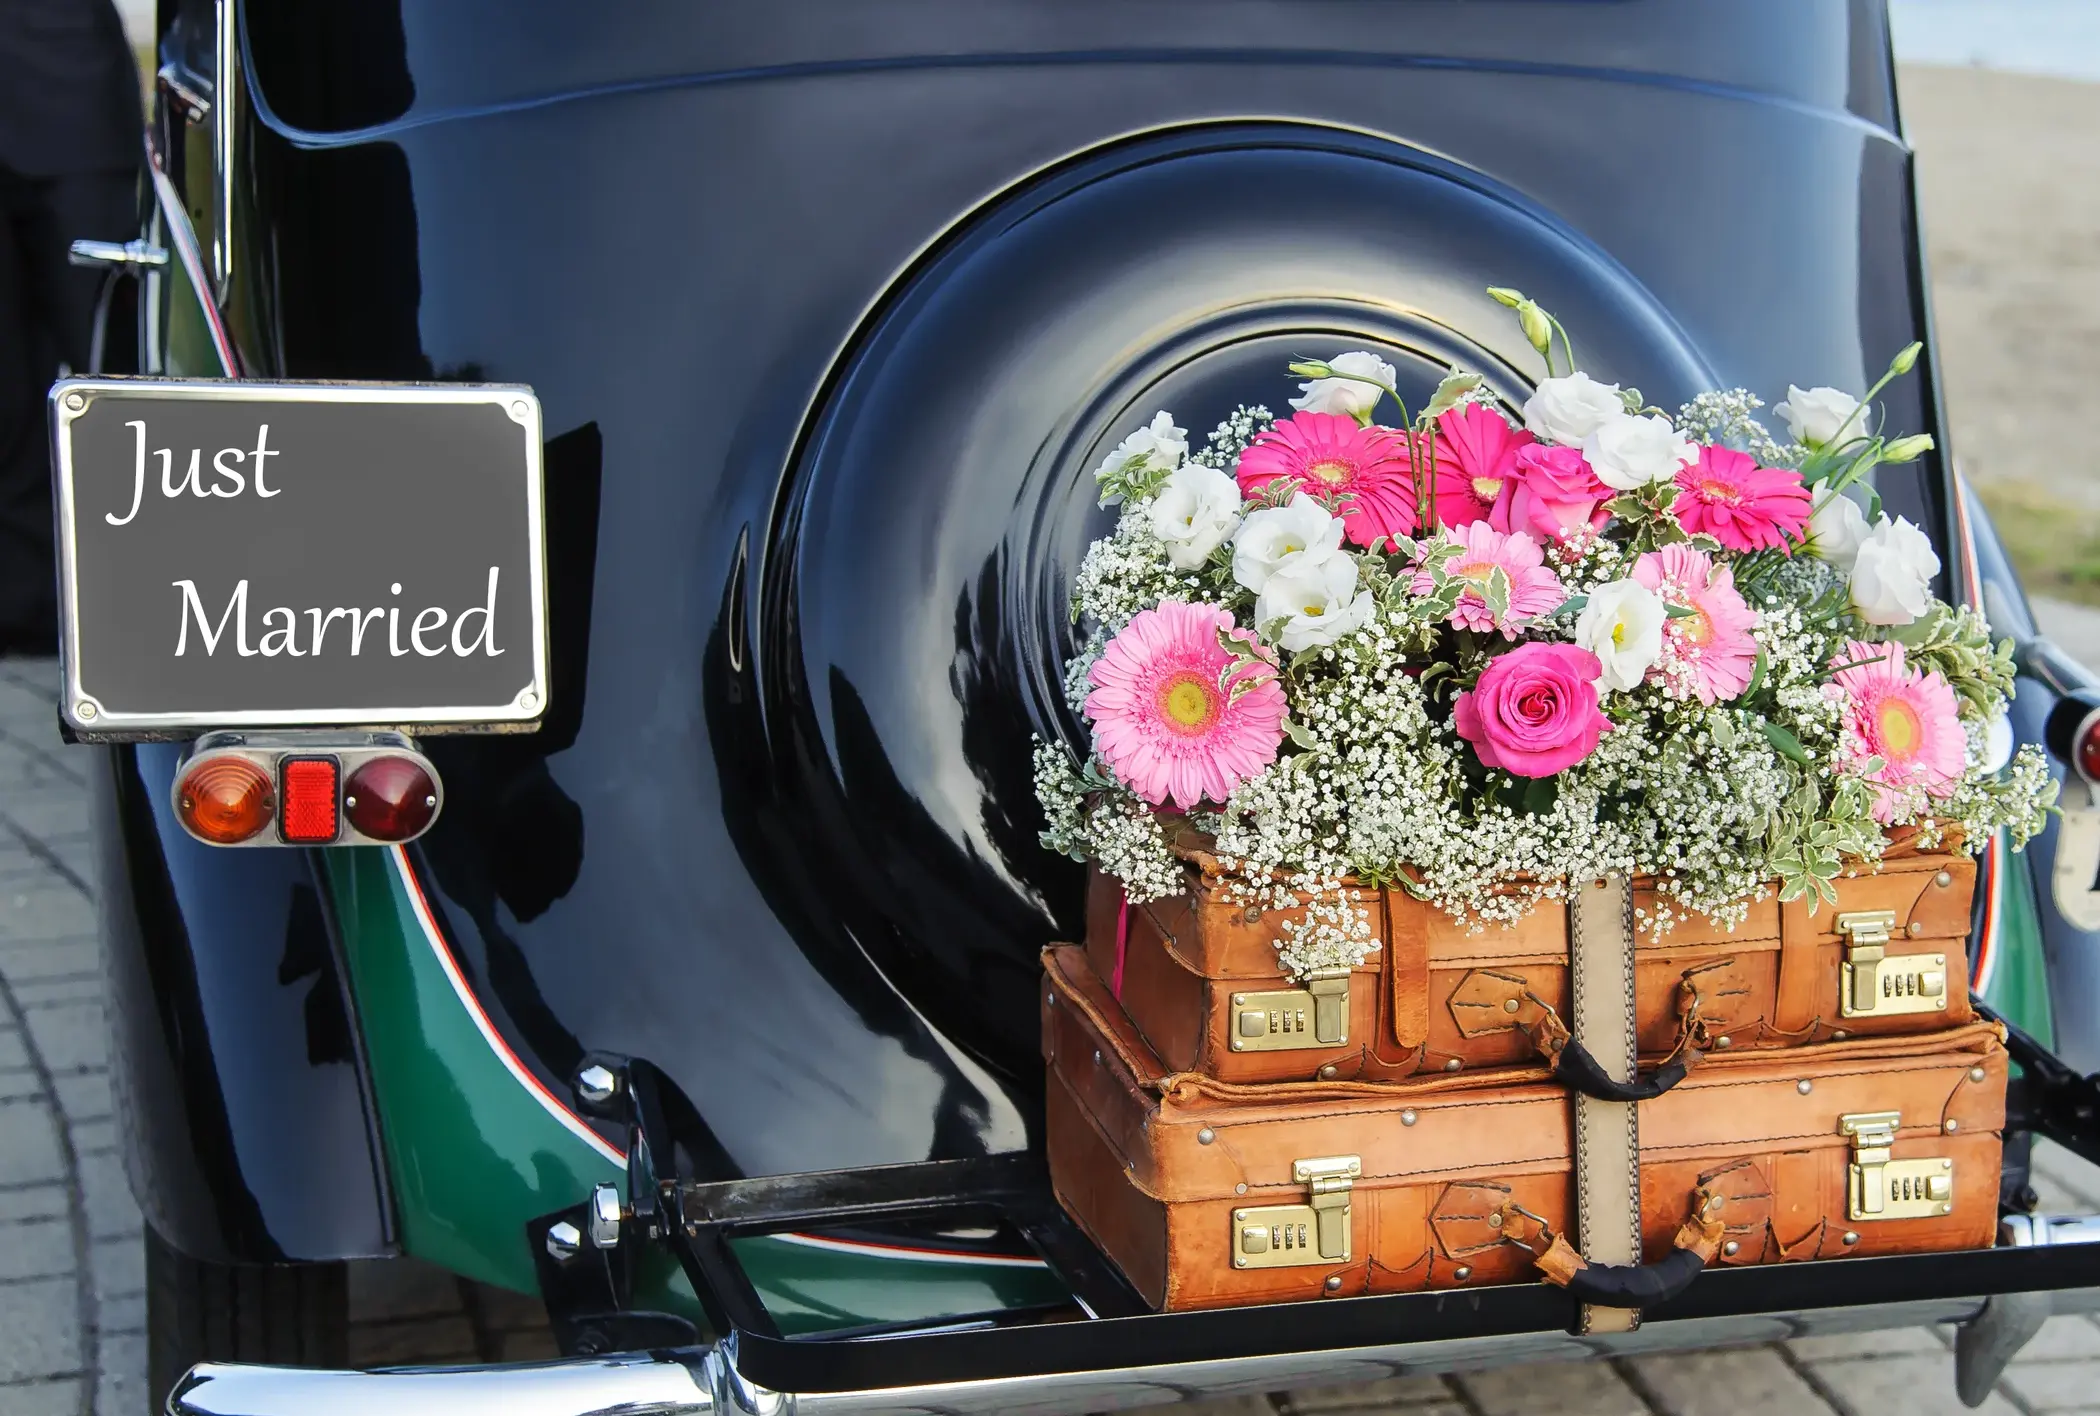 Tale end of a car with bridal bouquet